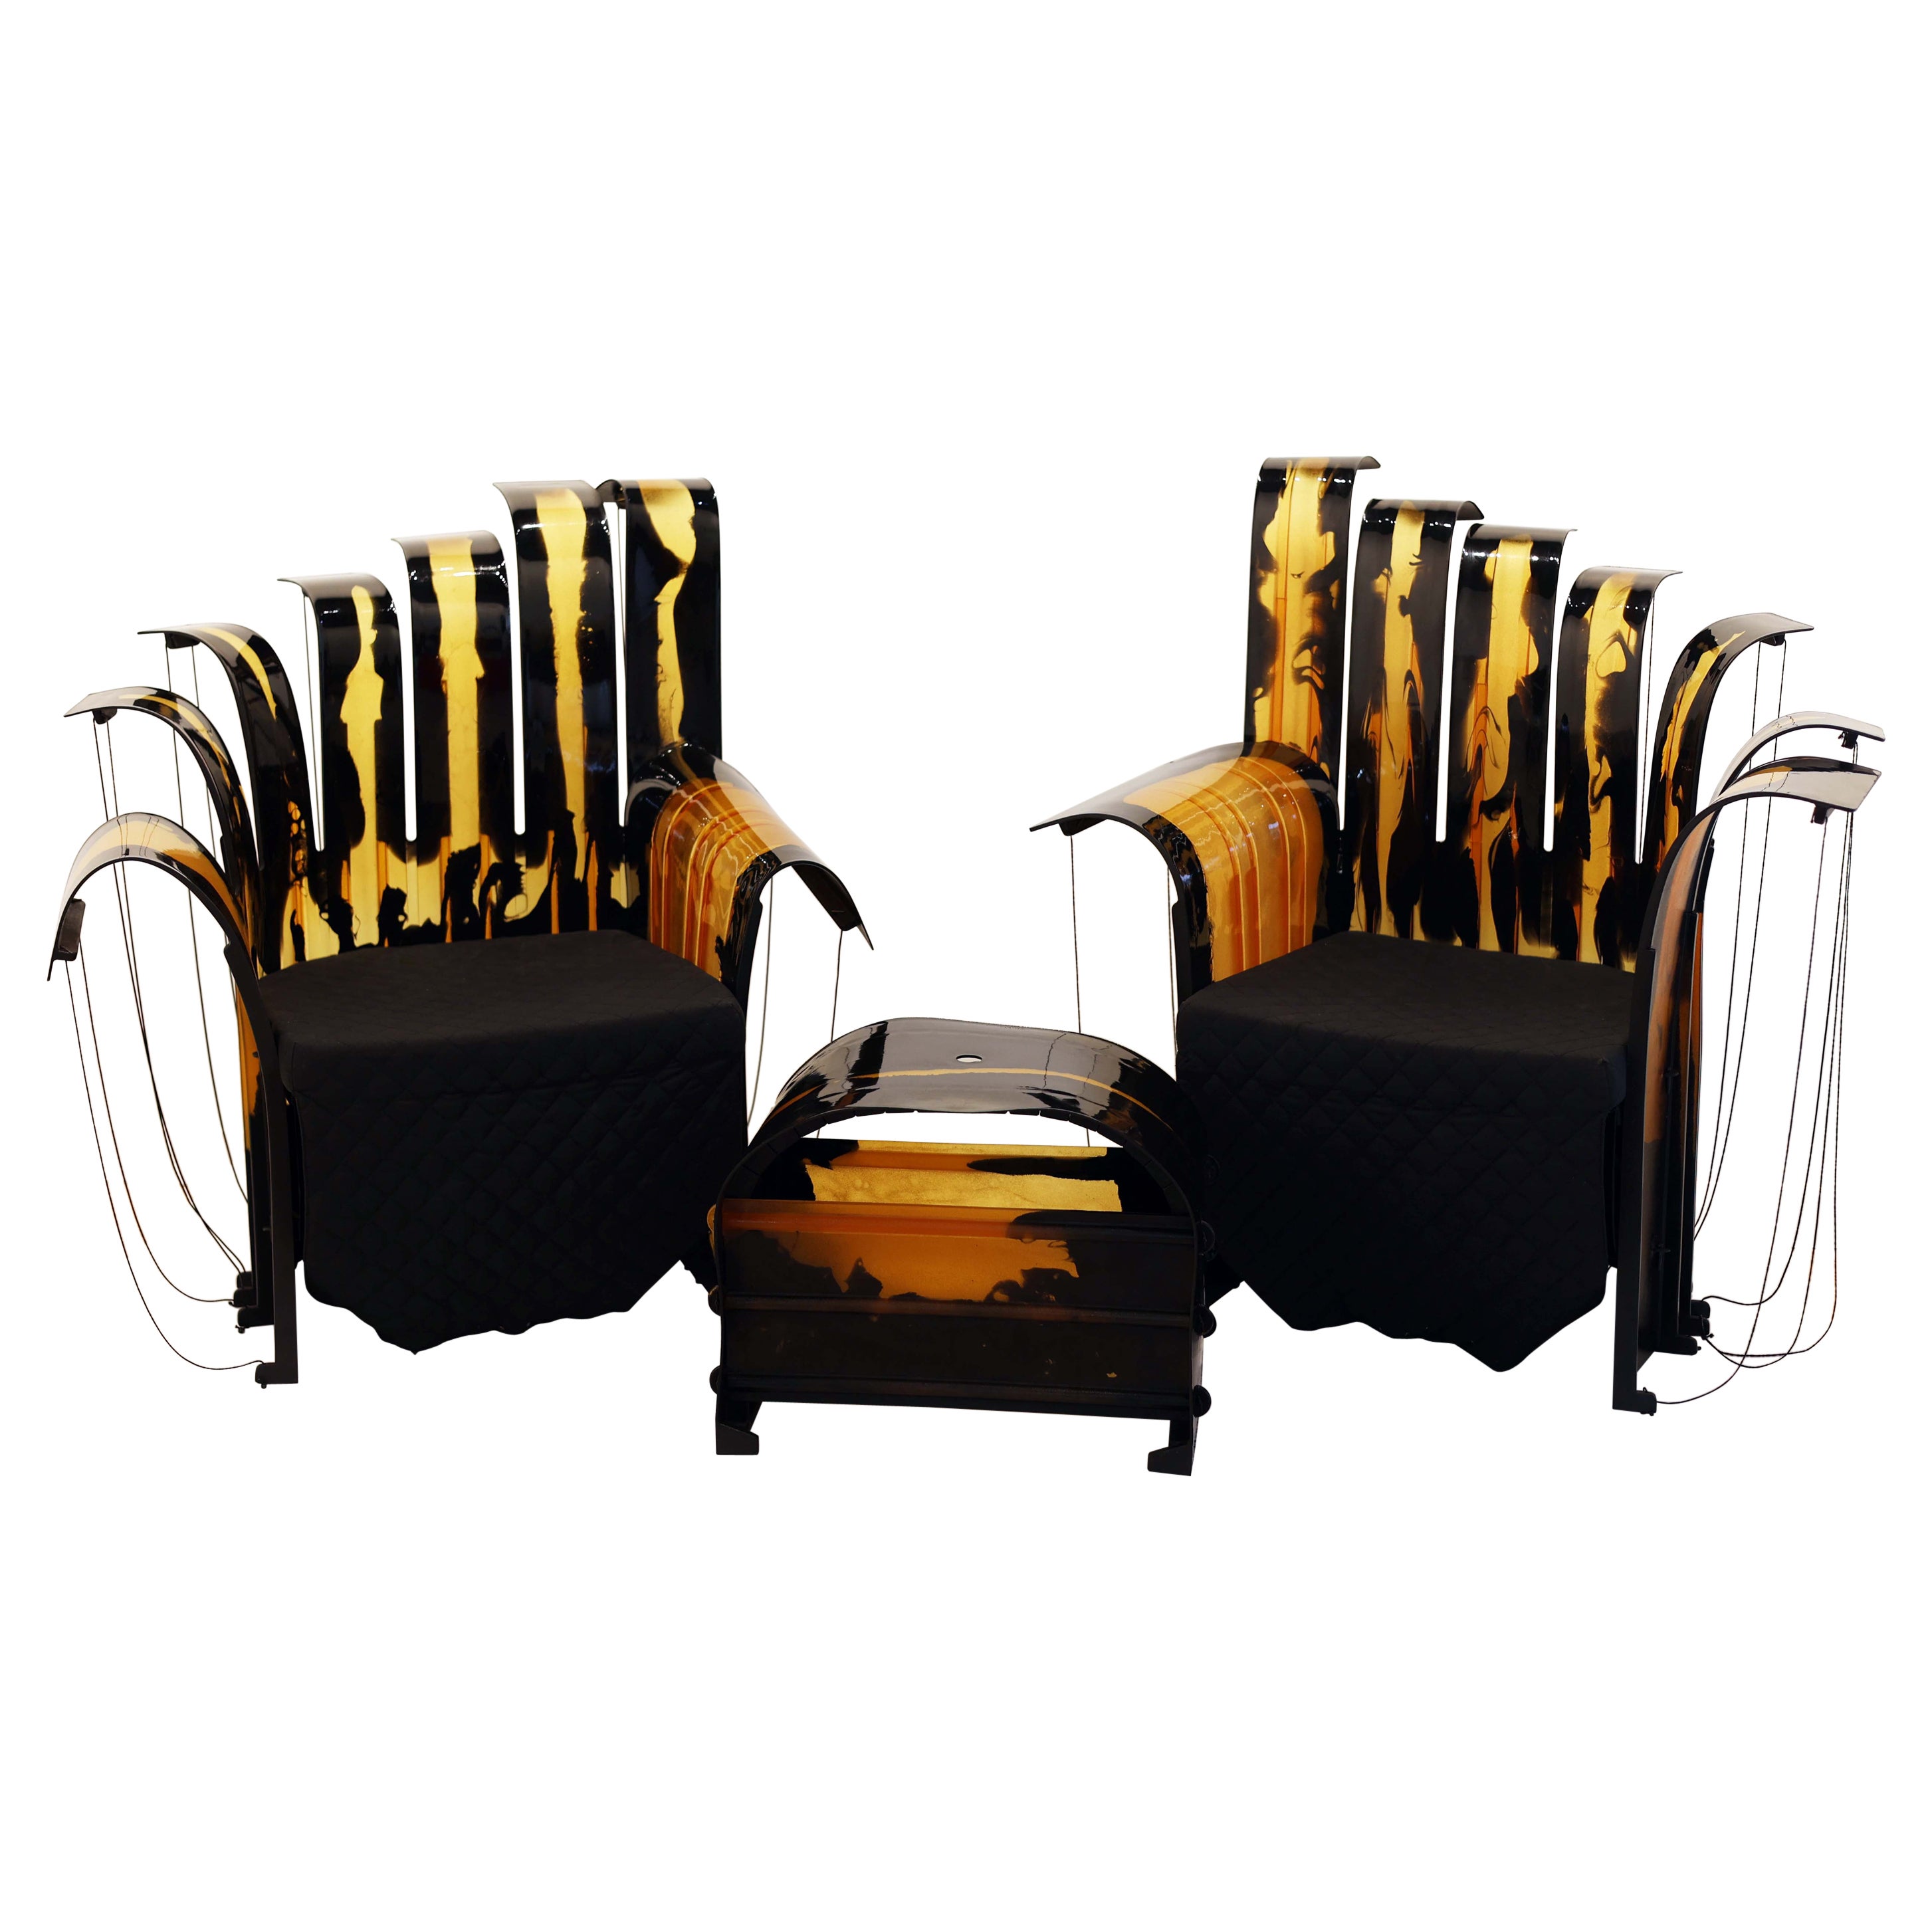 Gaetano Pesce Nobody's Royal Chairs with Nobody's Pouf Ottoman  For Sale